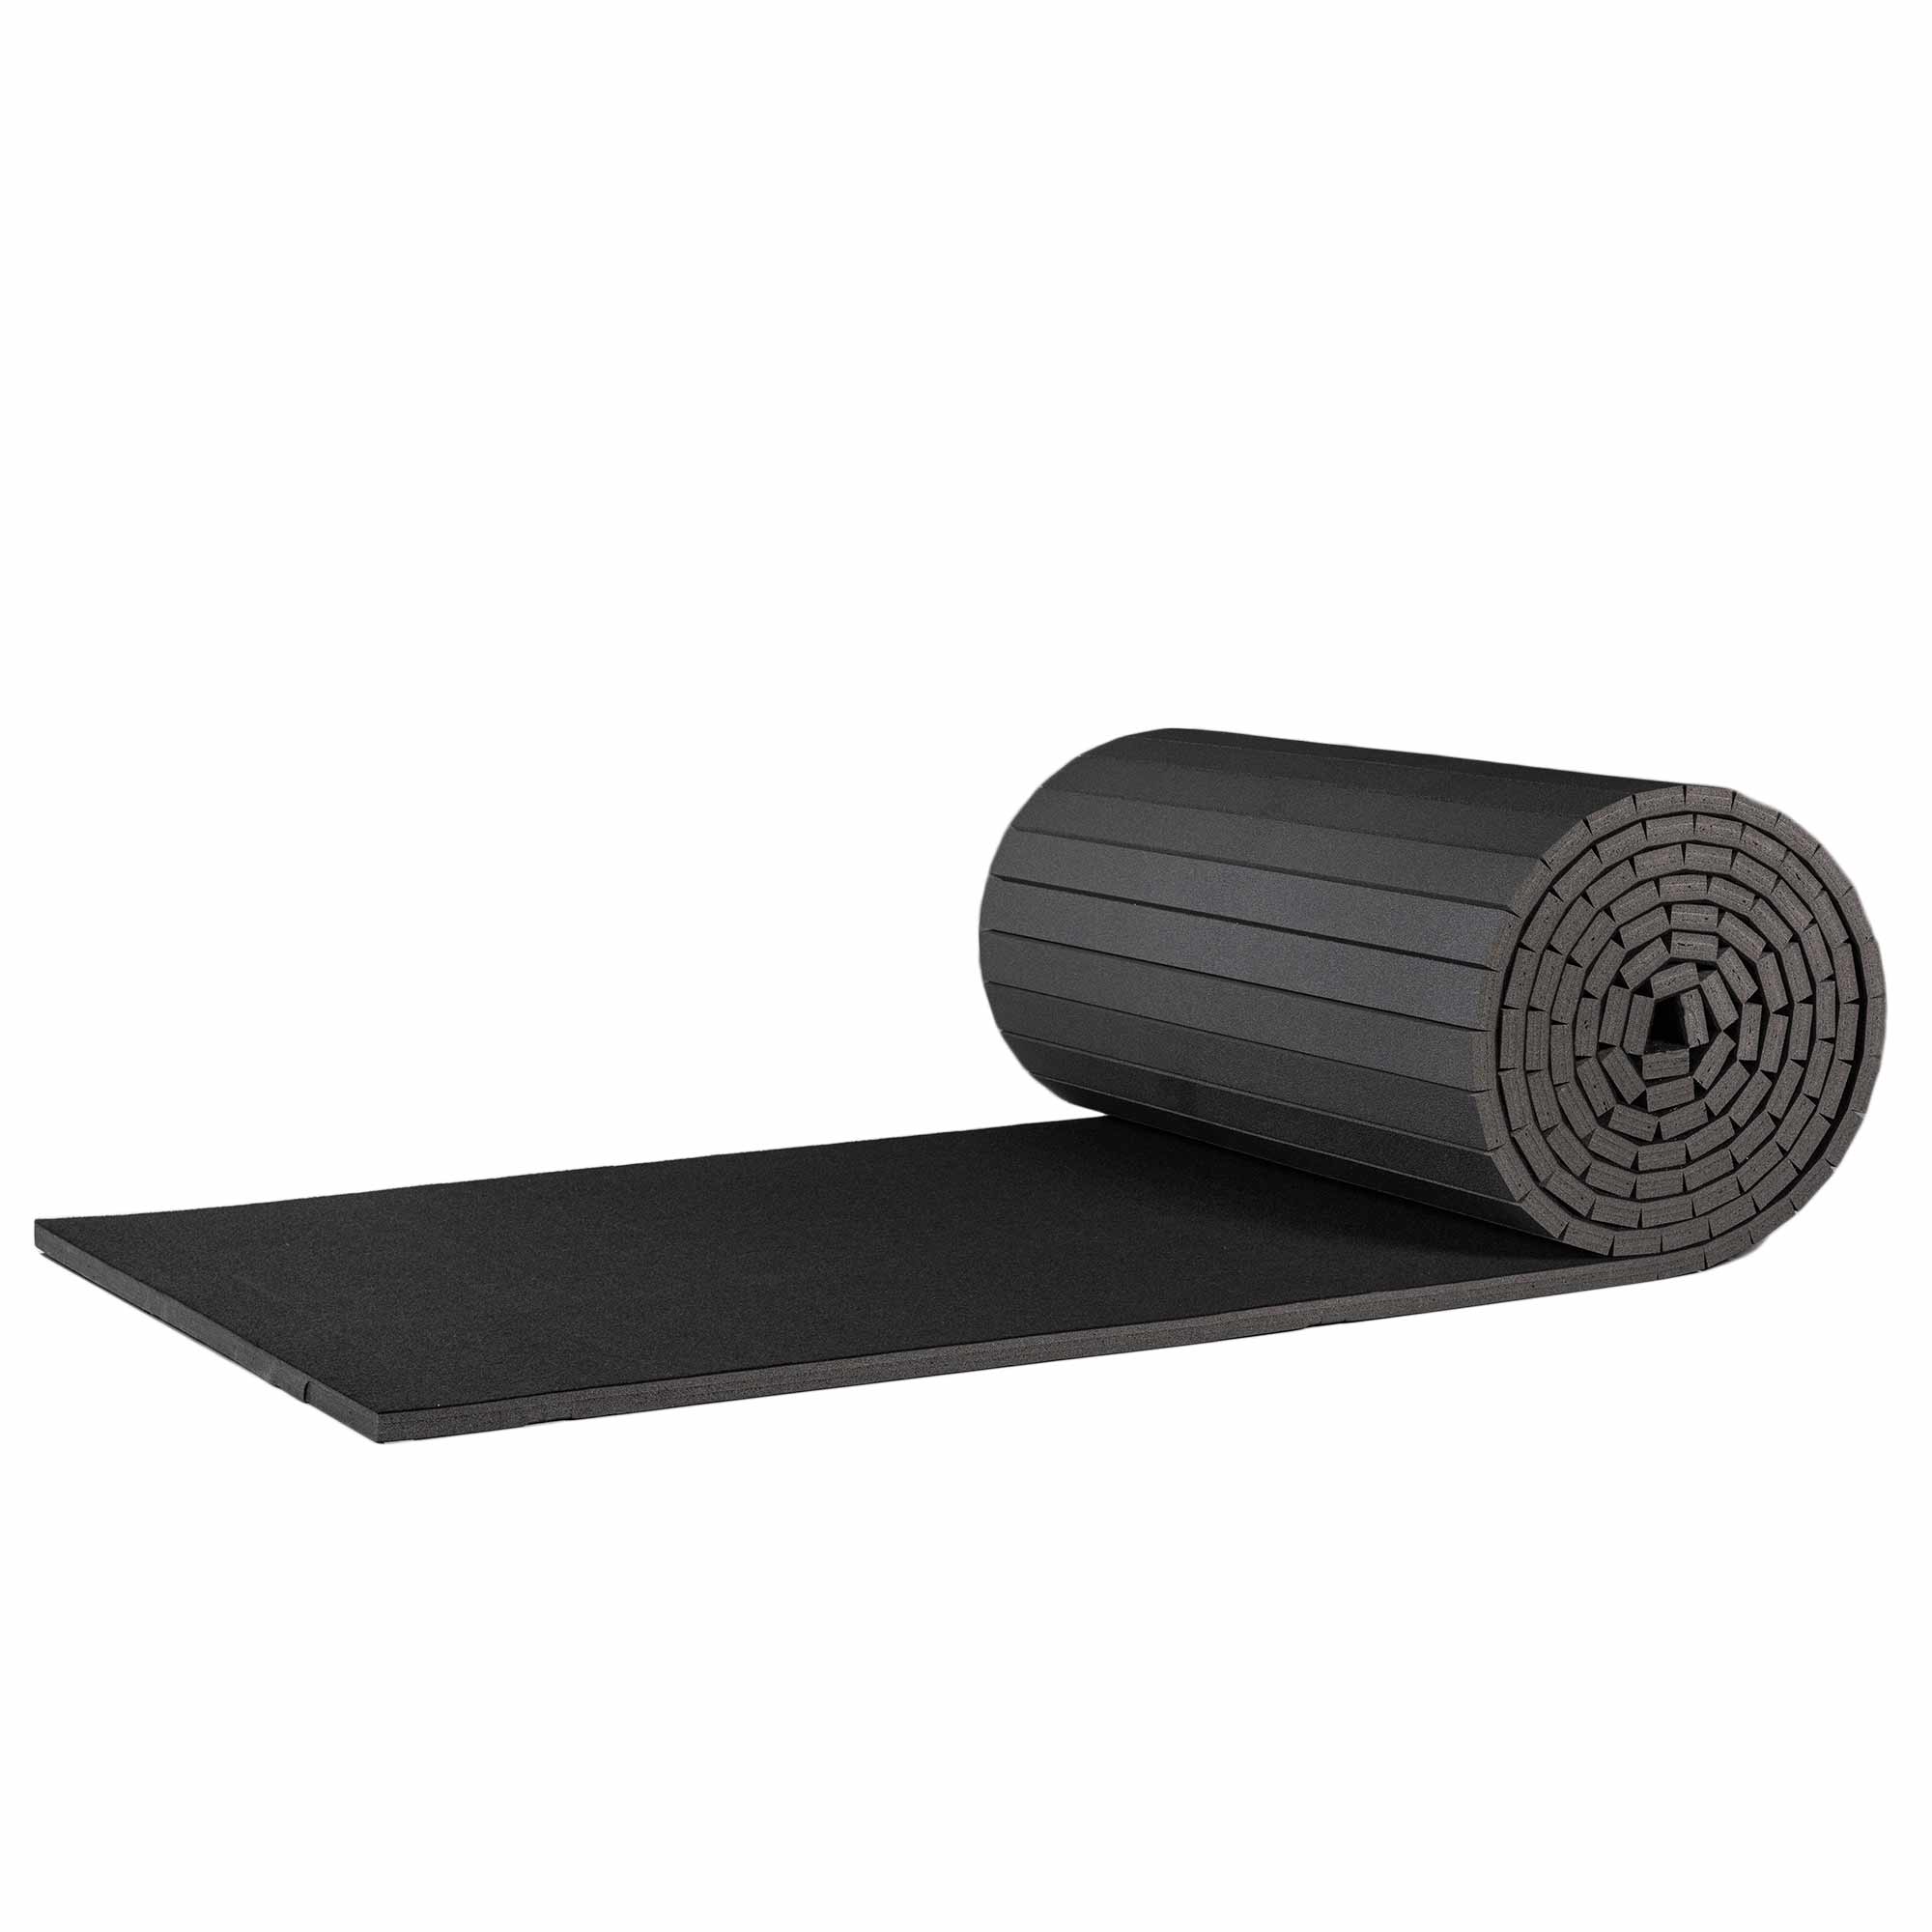 1/4 Thick Rubber Roll Matting - 4' x 1' - 1/4 Thick Gym Rolls